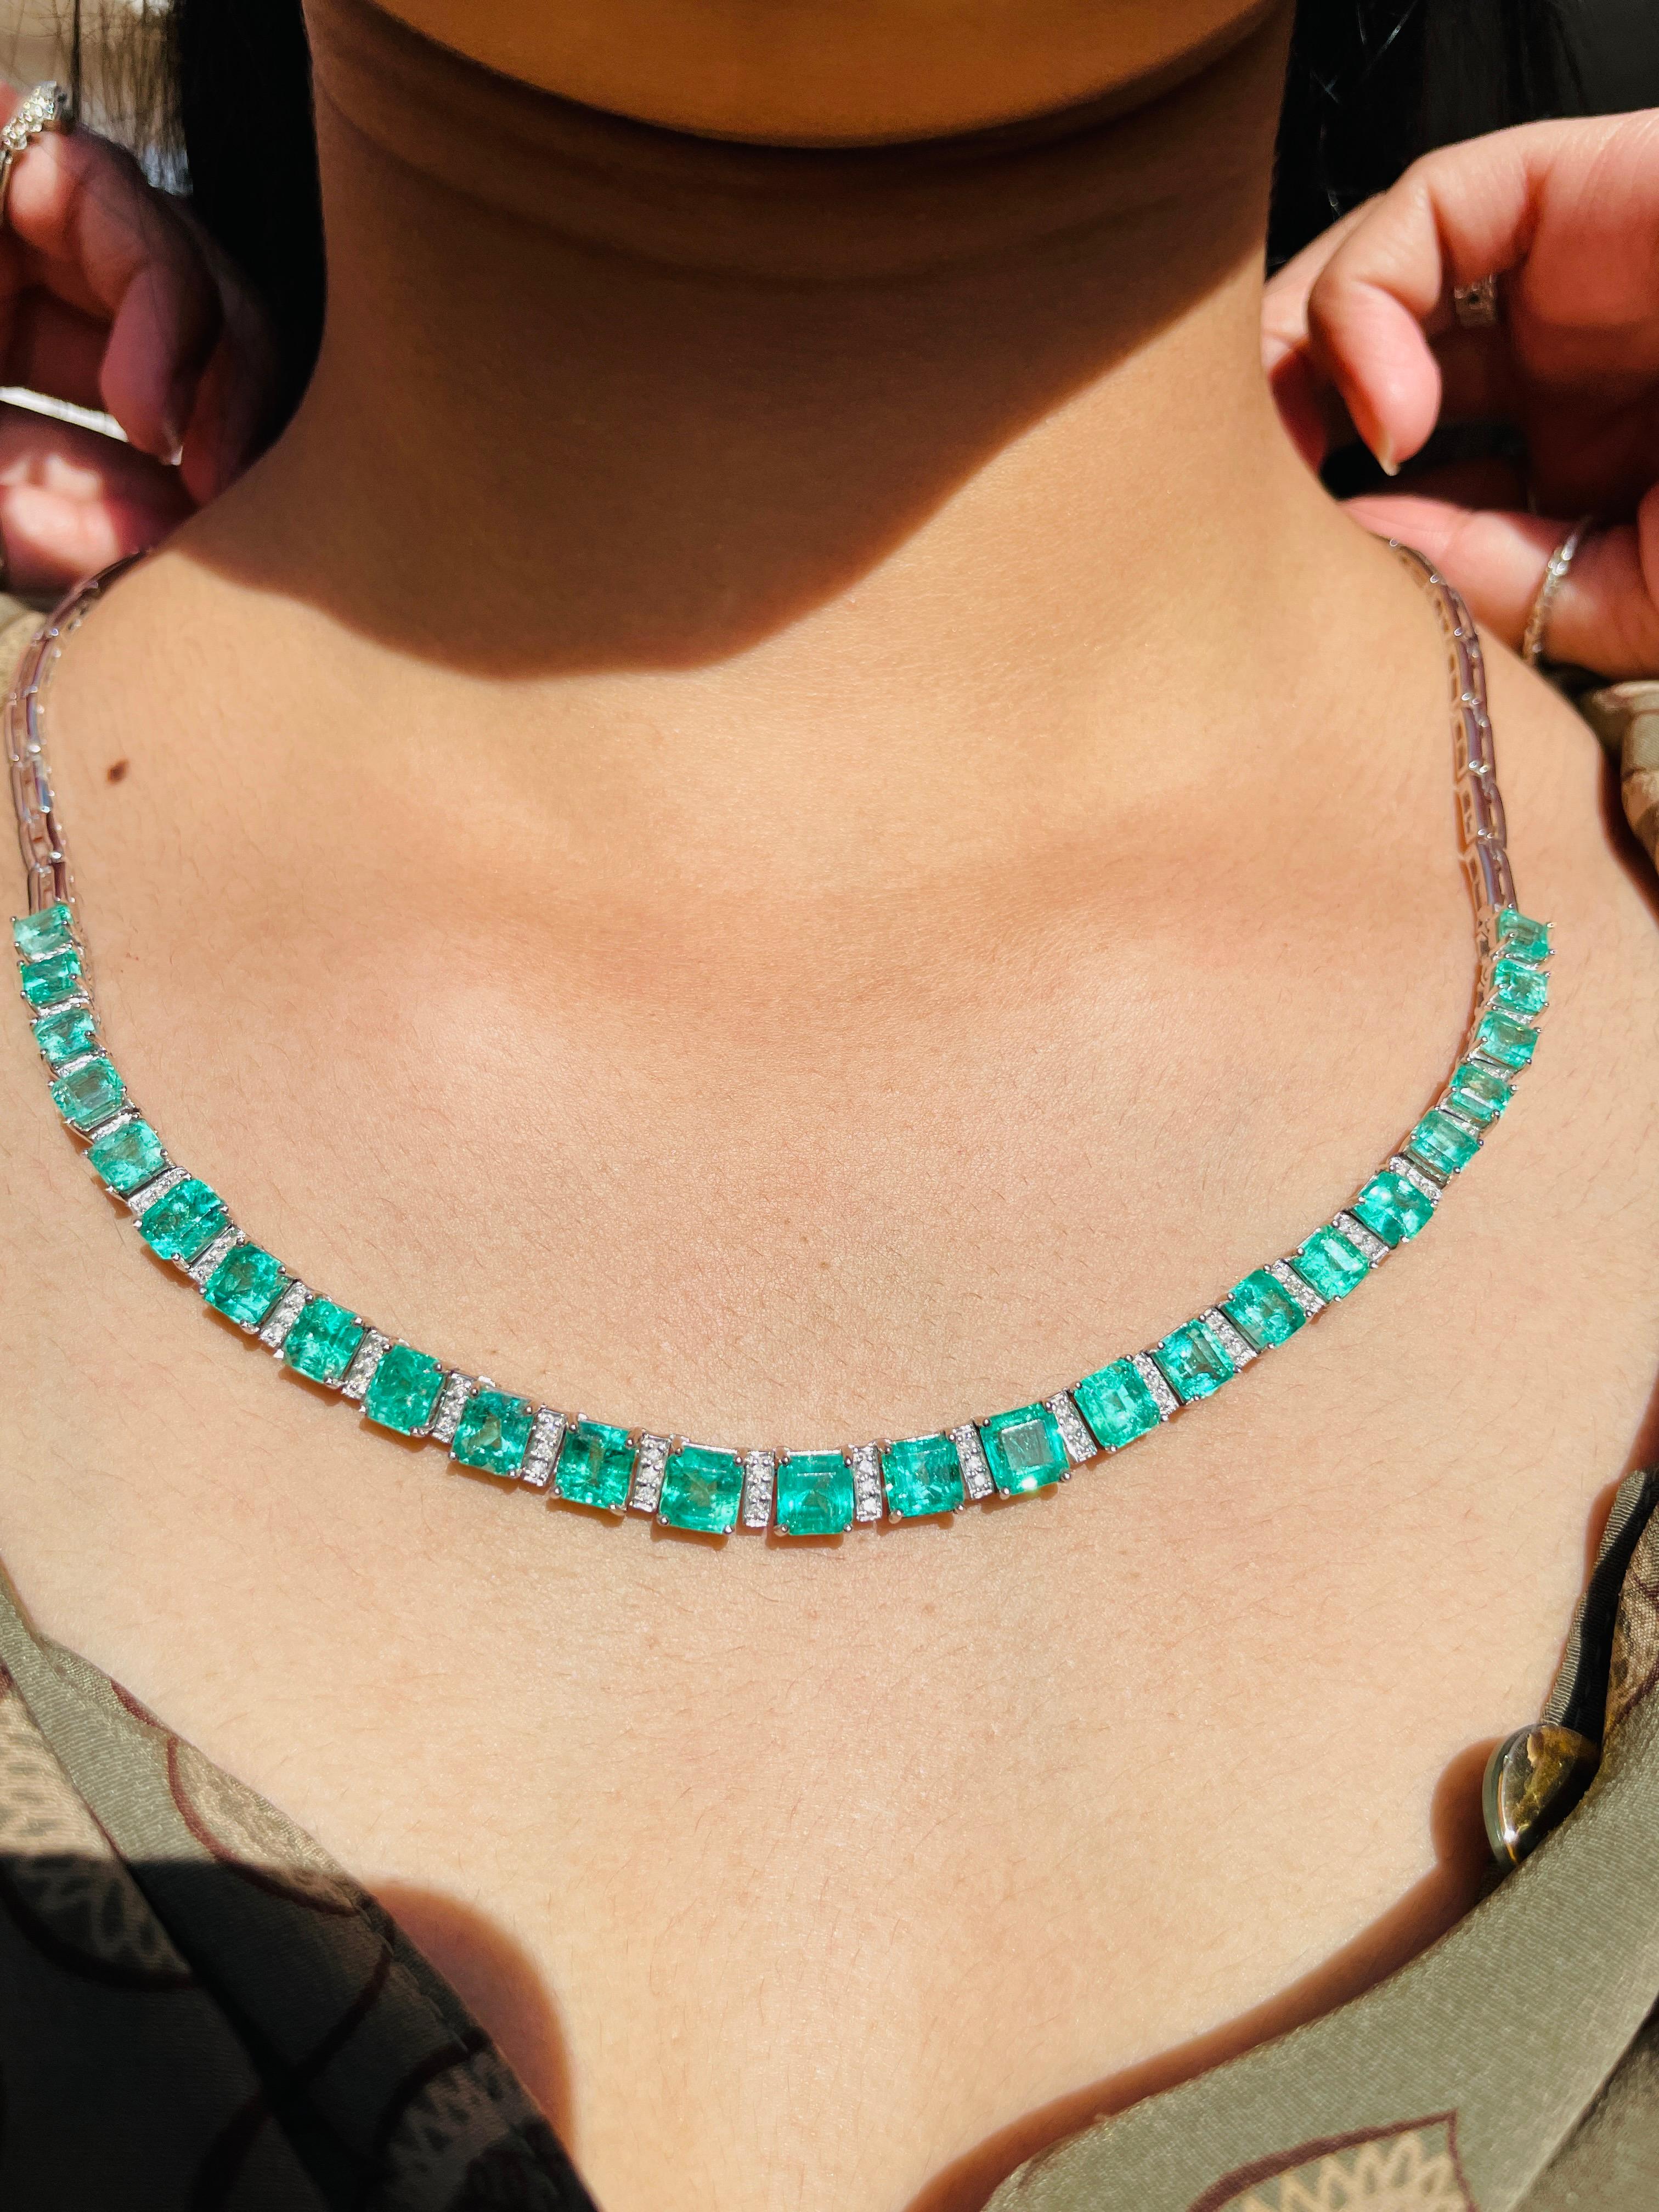 Emerald Necklace in 18K Gold studded with square cut emerald pieces and diamonds.
Accessorize your look with this elegant emerald beaded necklace. This stunning piece of jewelry instantly elevates a casual look or dressy outfit. Comfortable and easy